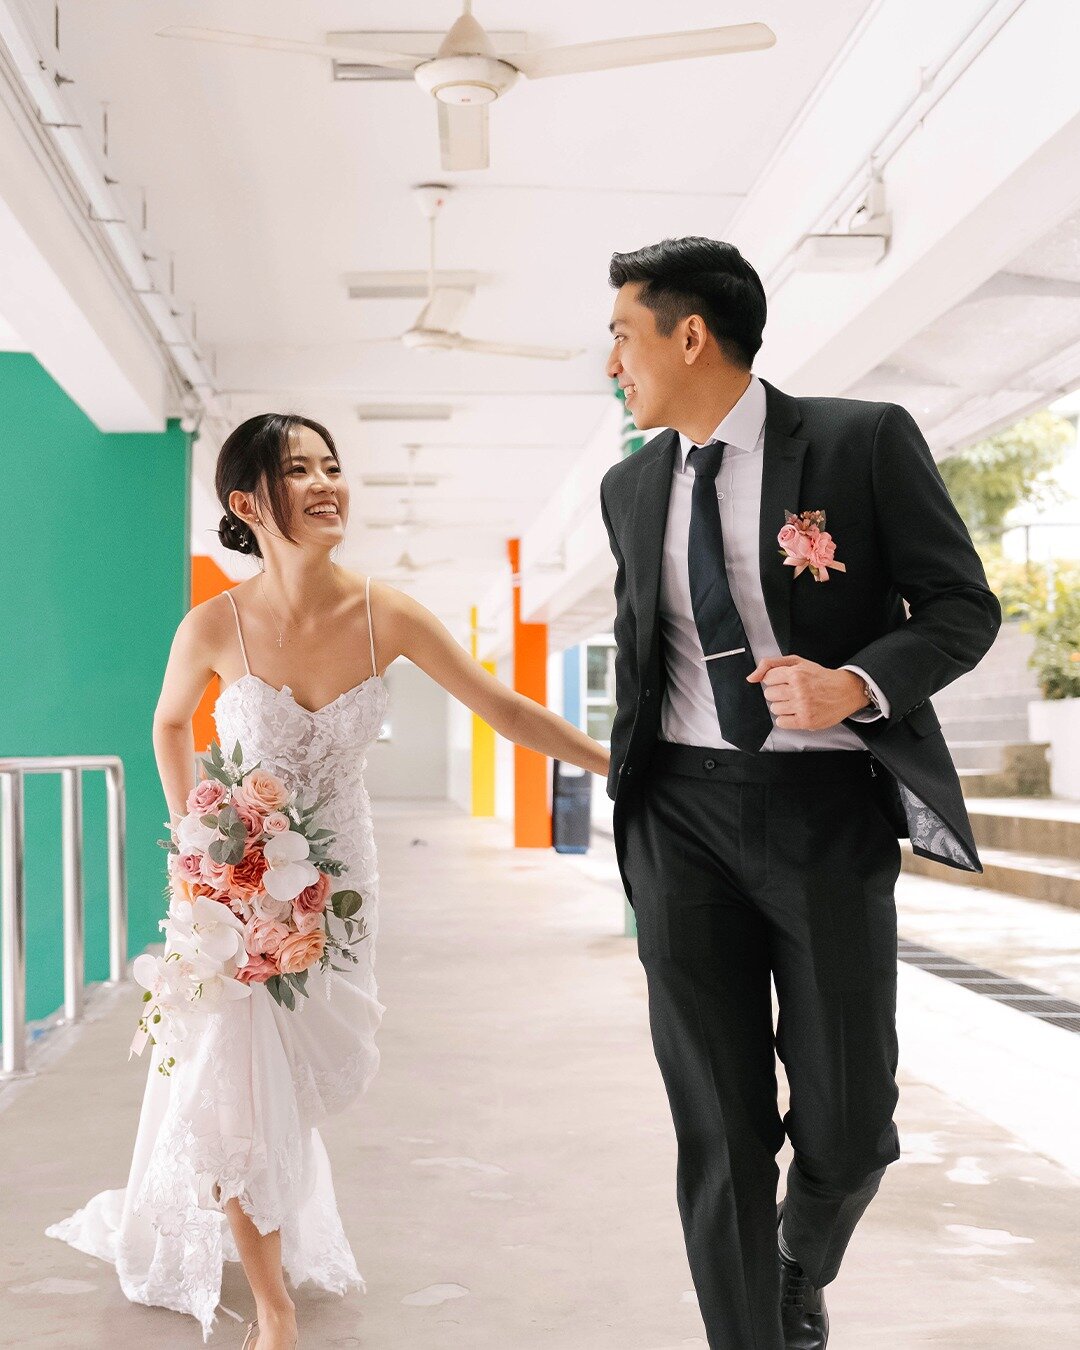 from shared textbooks to hand-in-hand walks, cavyn and charmaine's love journey blossoms amidst the vibrant streets of tiong bahru
.
for more info on our 2024 pre wedding packages, reach out to us by sending us a direct message!
.
.
.
#sgweddings
#sg